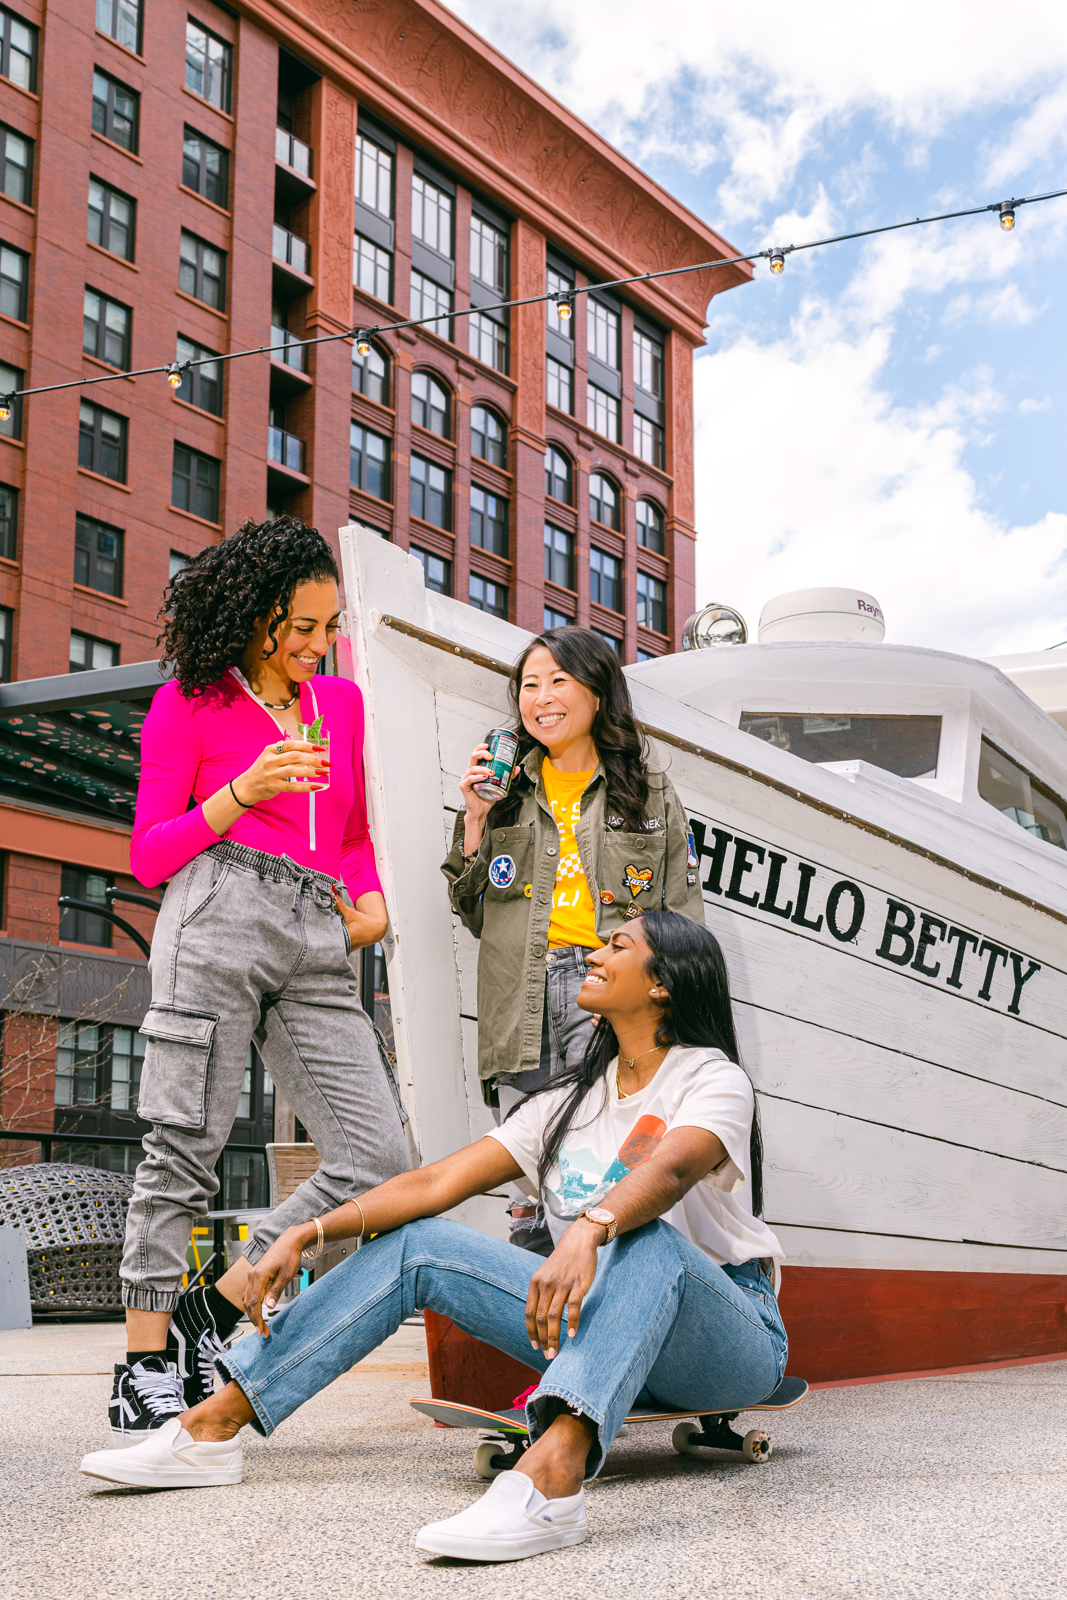 Restaurant photography | Three women hanging around and drinking by "Hello Betty" boat | Bethesda, MD | Oceanside, CA